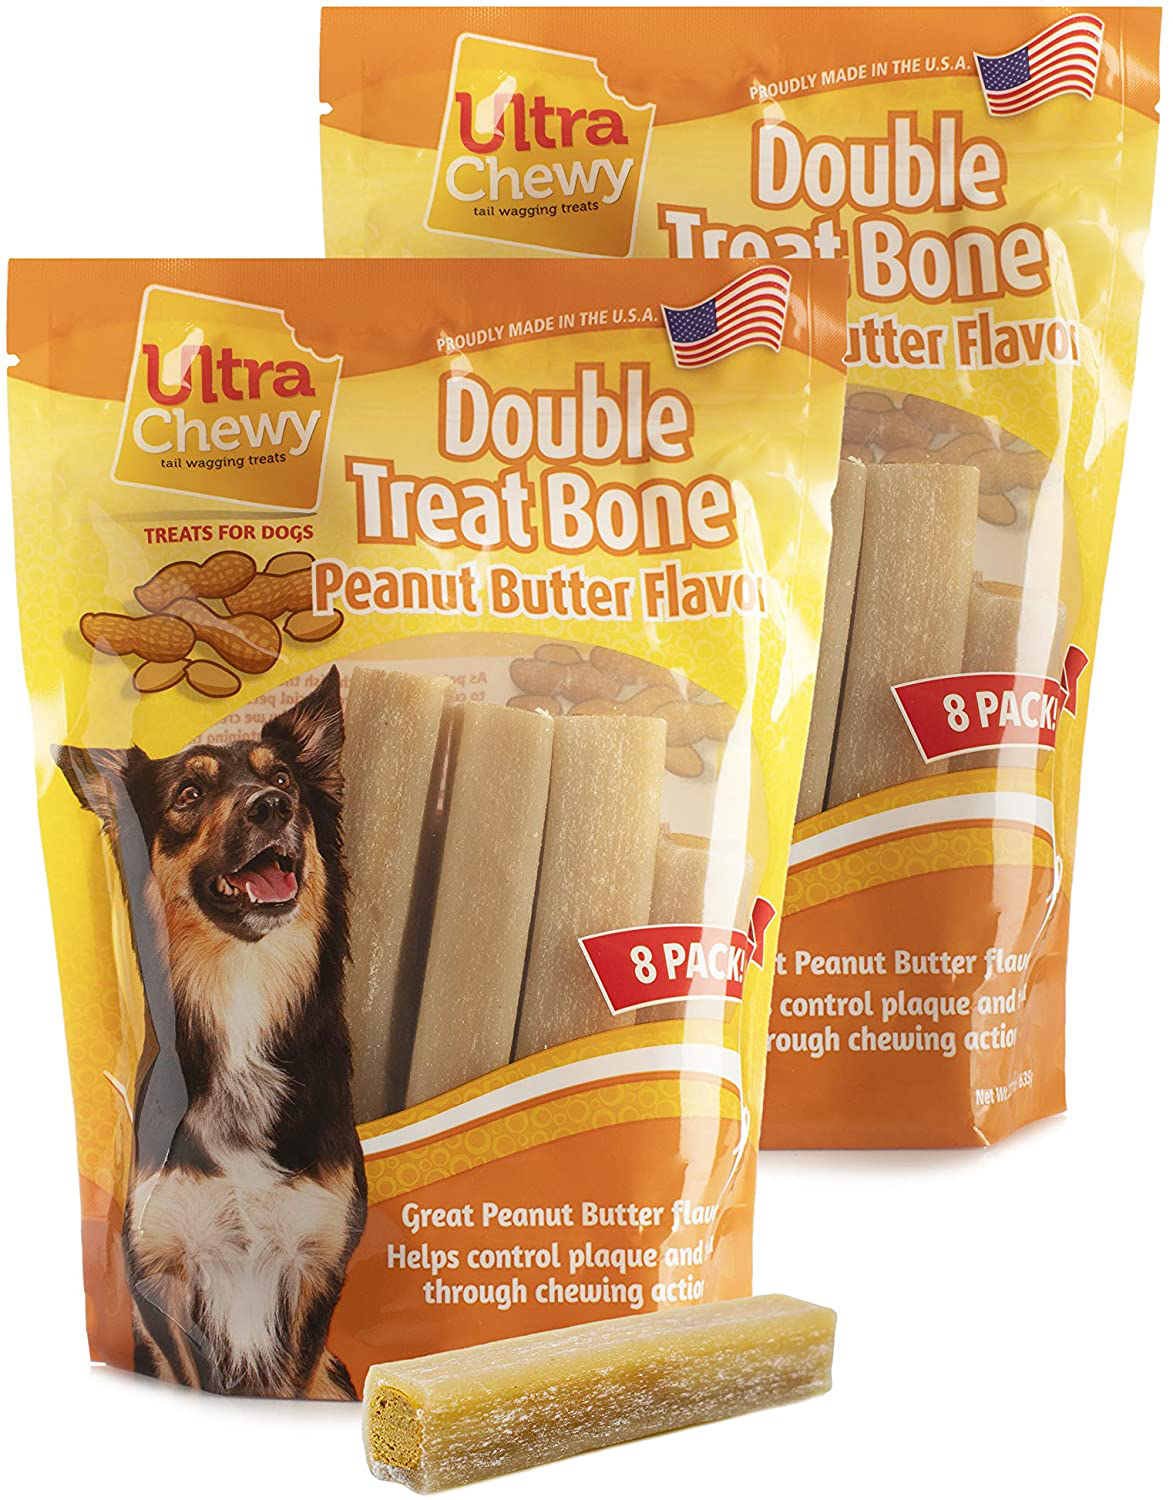 Ultra Chewy Naturals Dog Treats Bone - Made in USA - Highly Digestible Irresistible Flavors Special - Box with 2 Value Packs